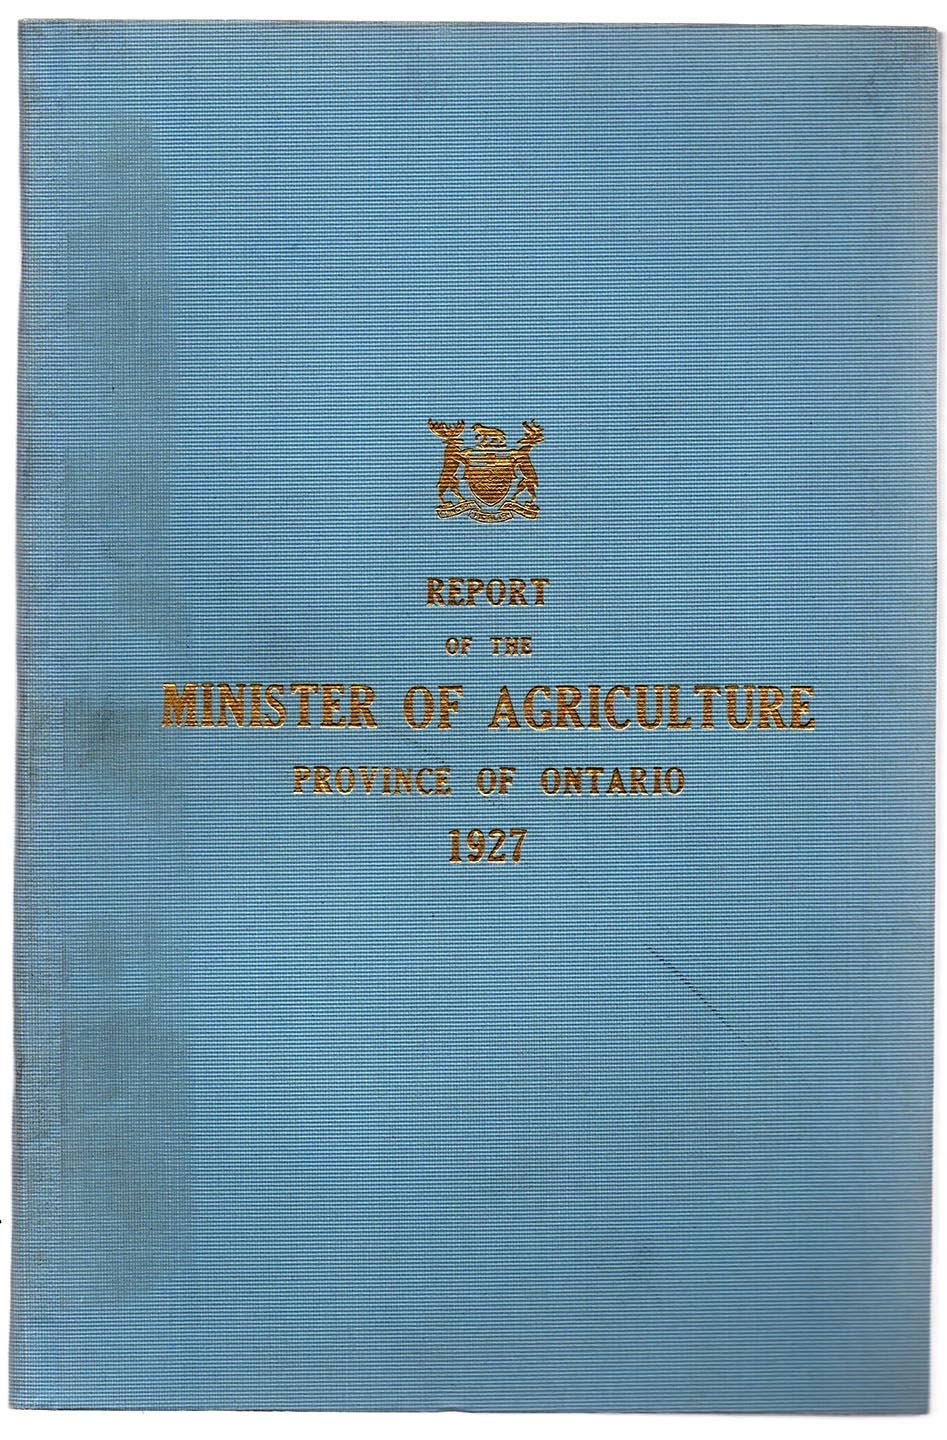 Report of the Minister of Agriculture Province of Ontario for the year ending October 31, 1927